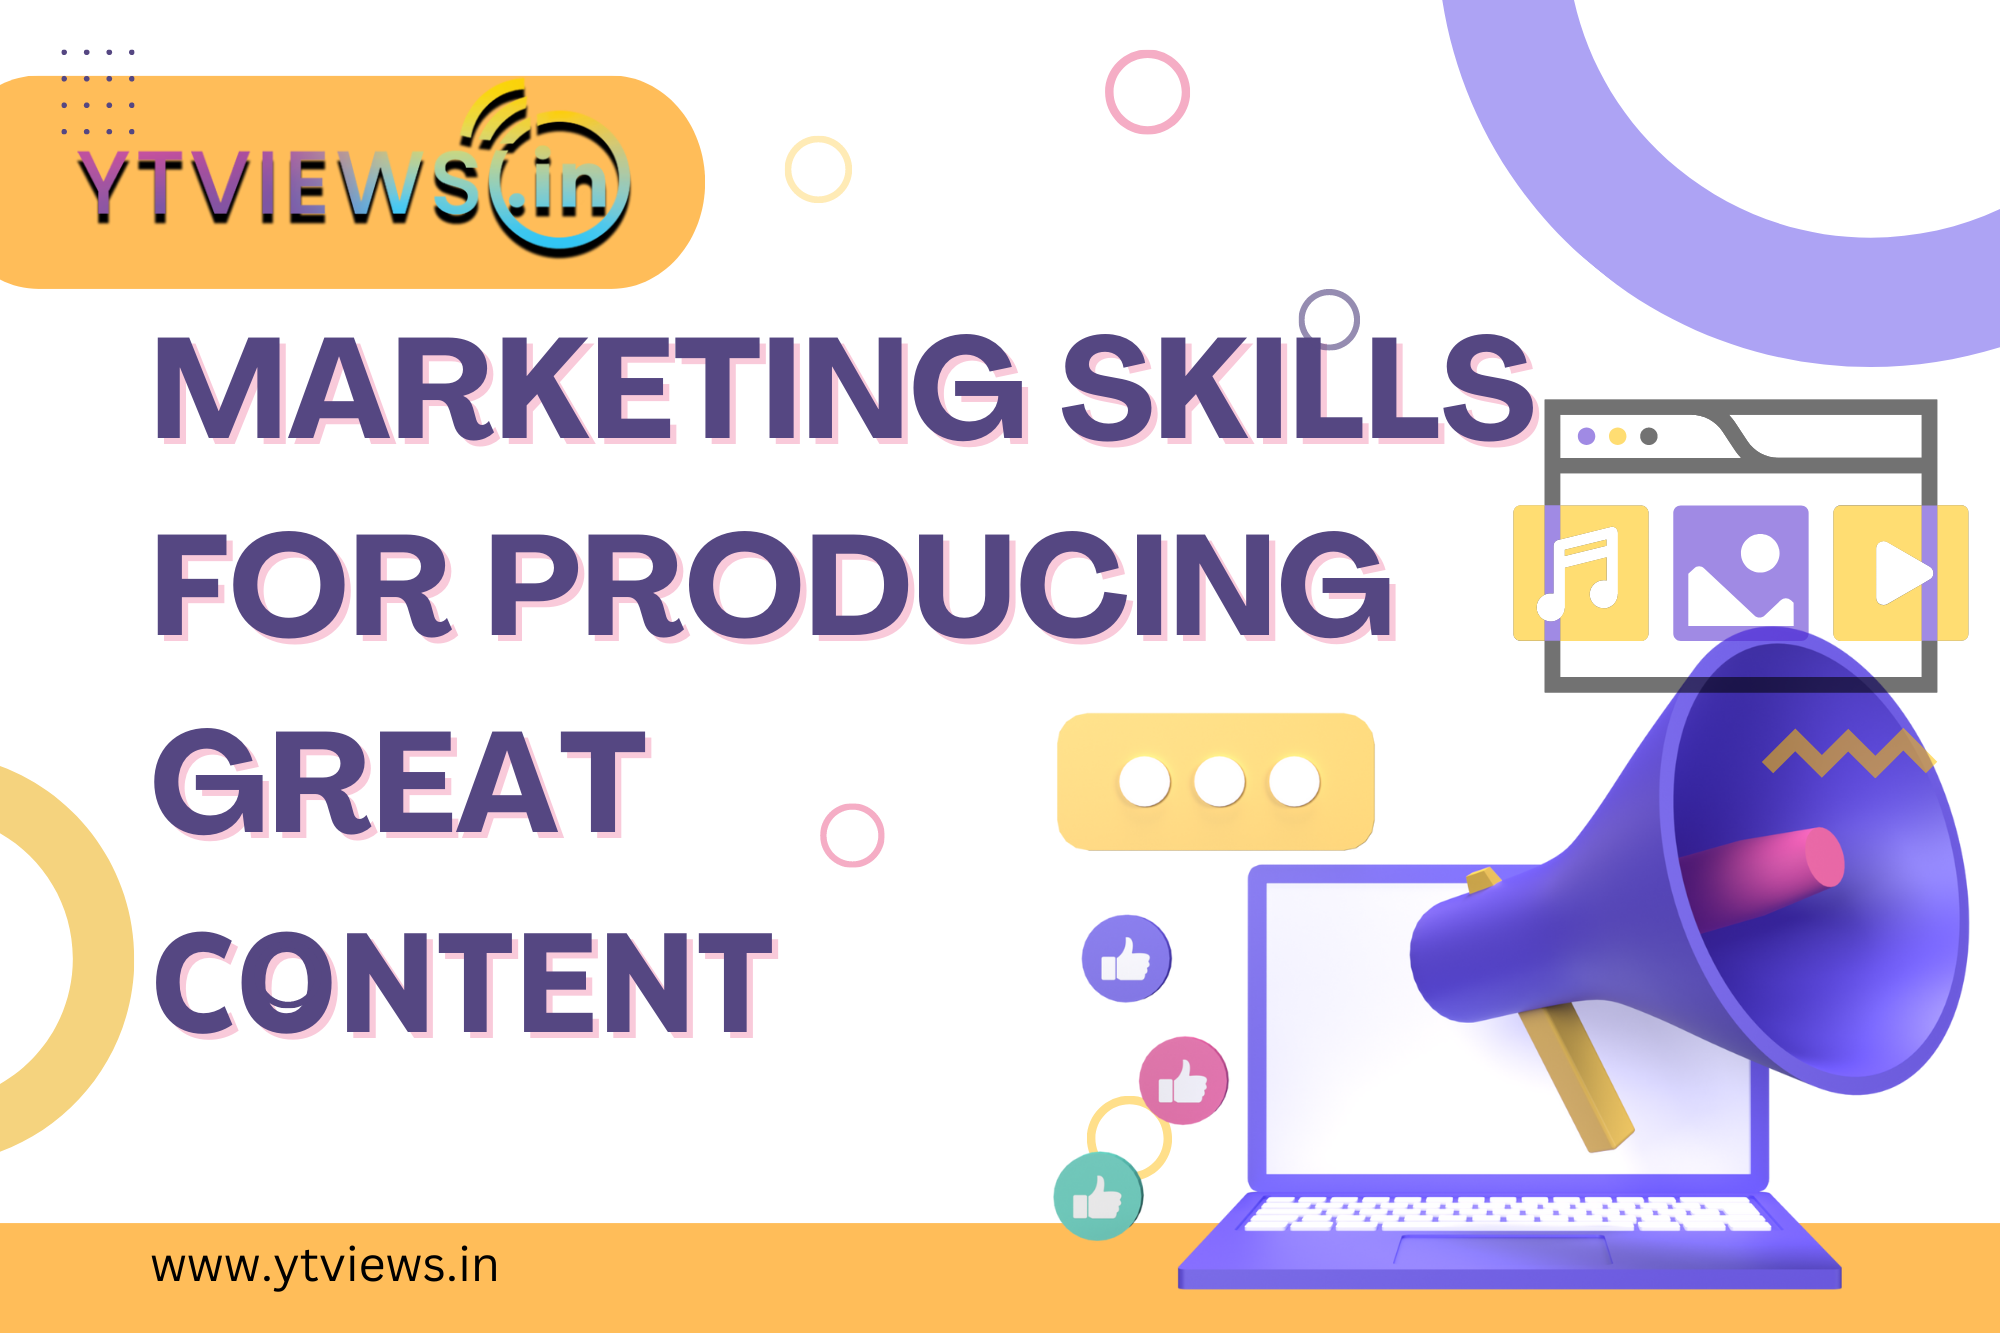 What are the invaluable marketing skills for producing consistently great content?